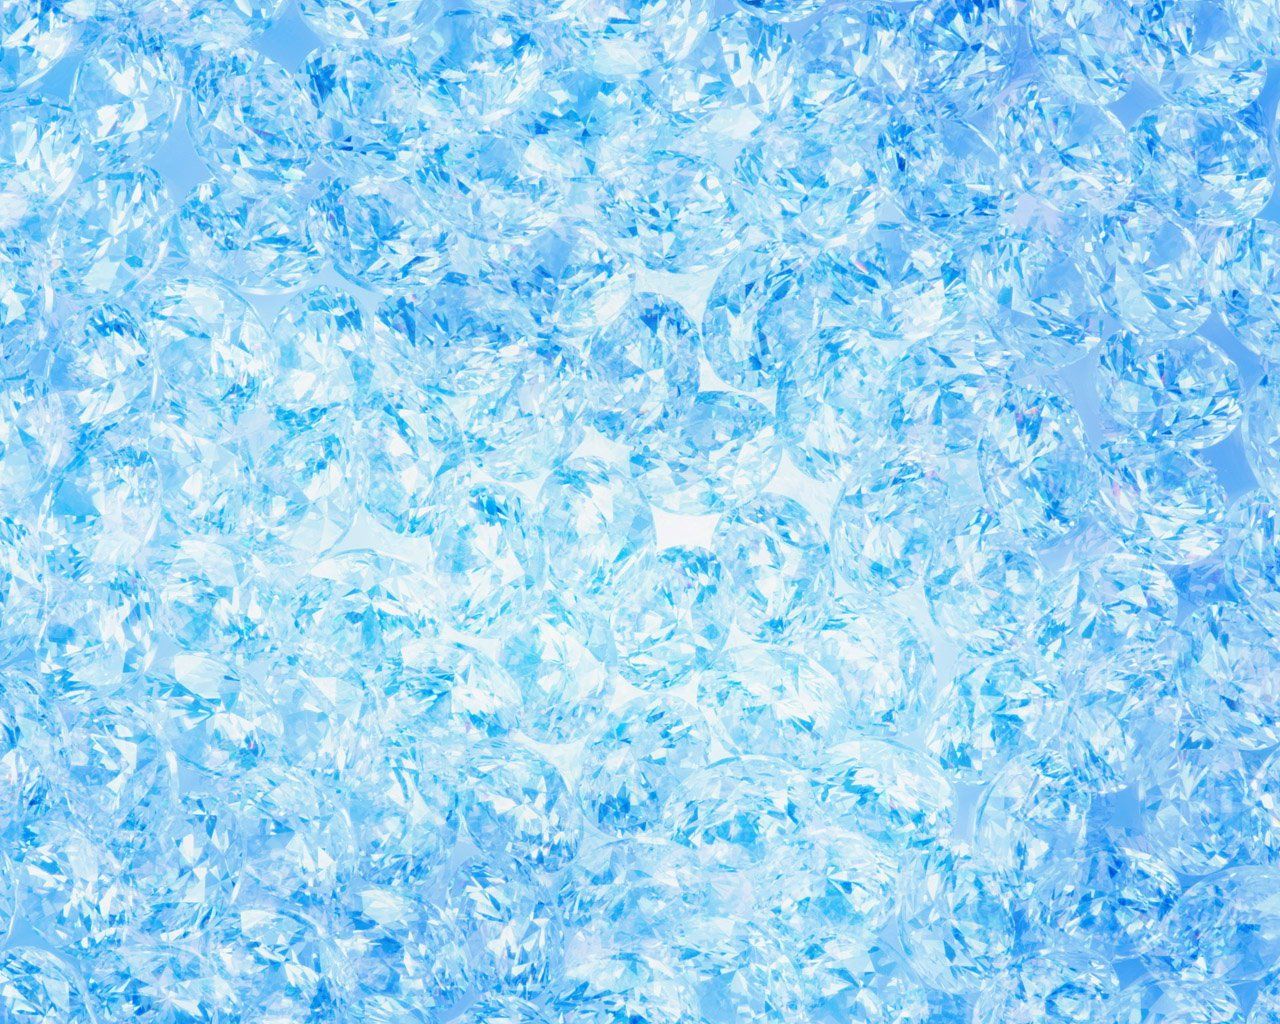 A blue background with white dots - Diamond